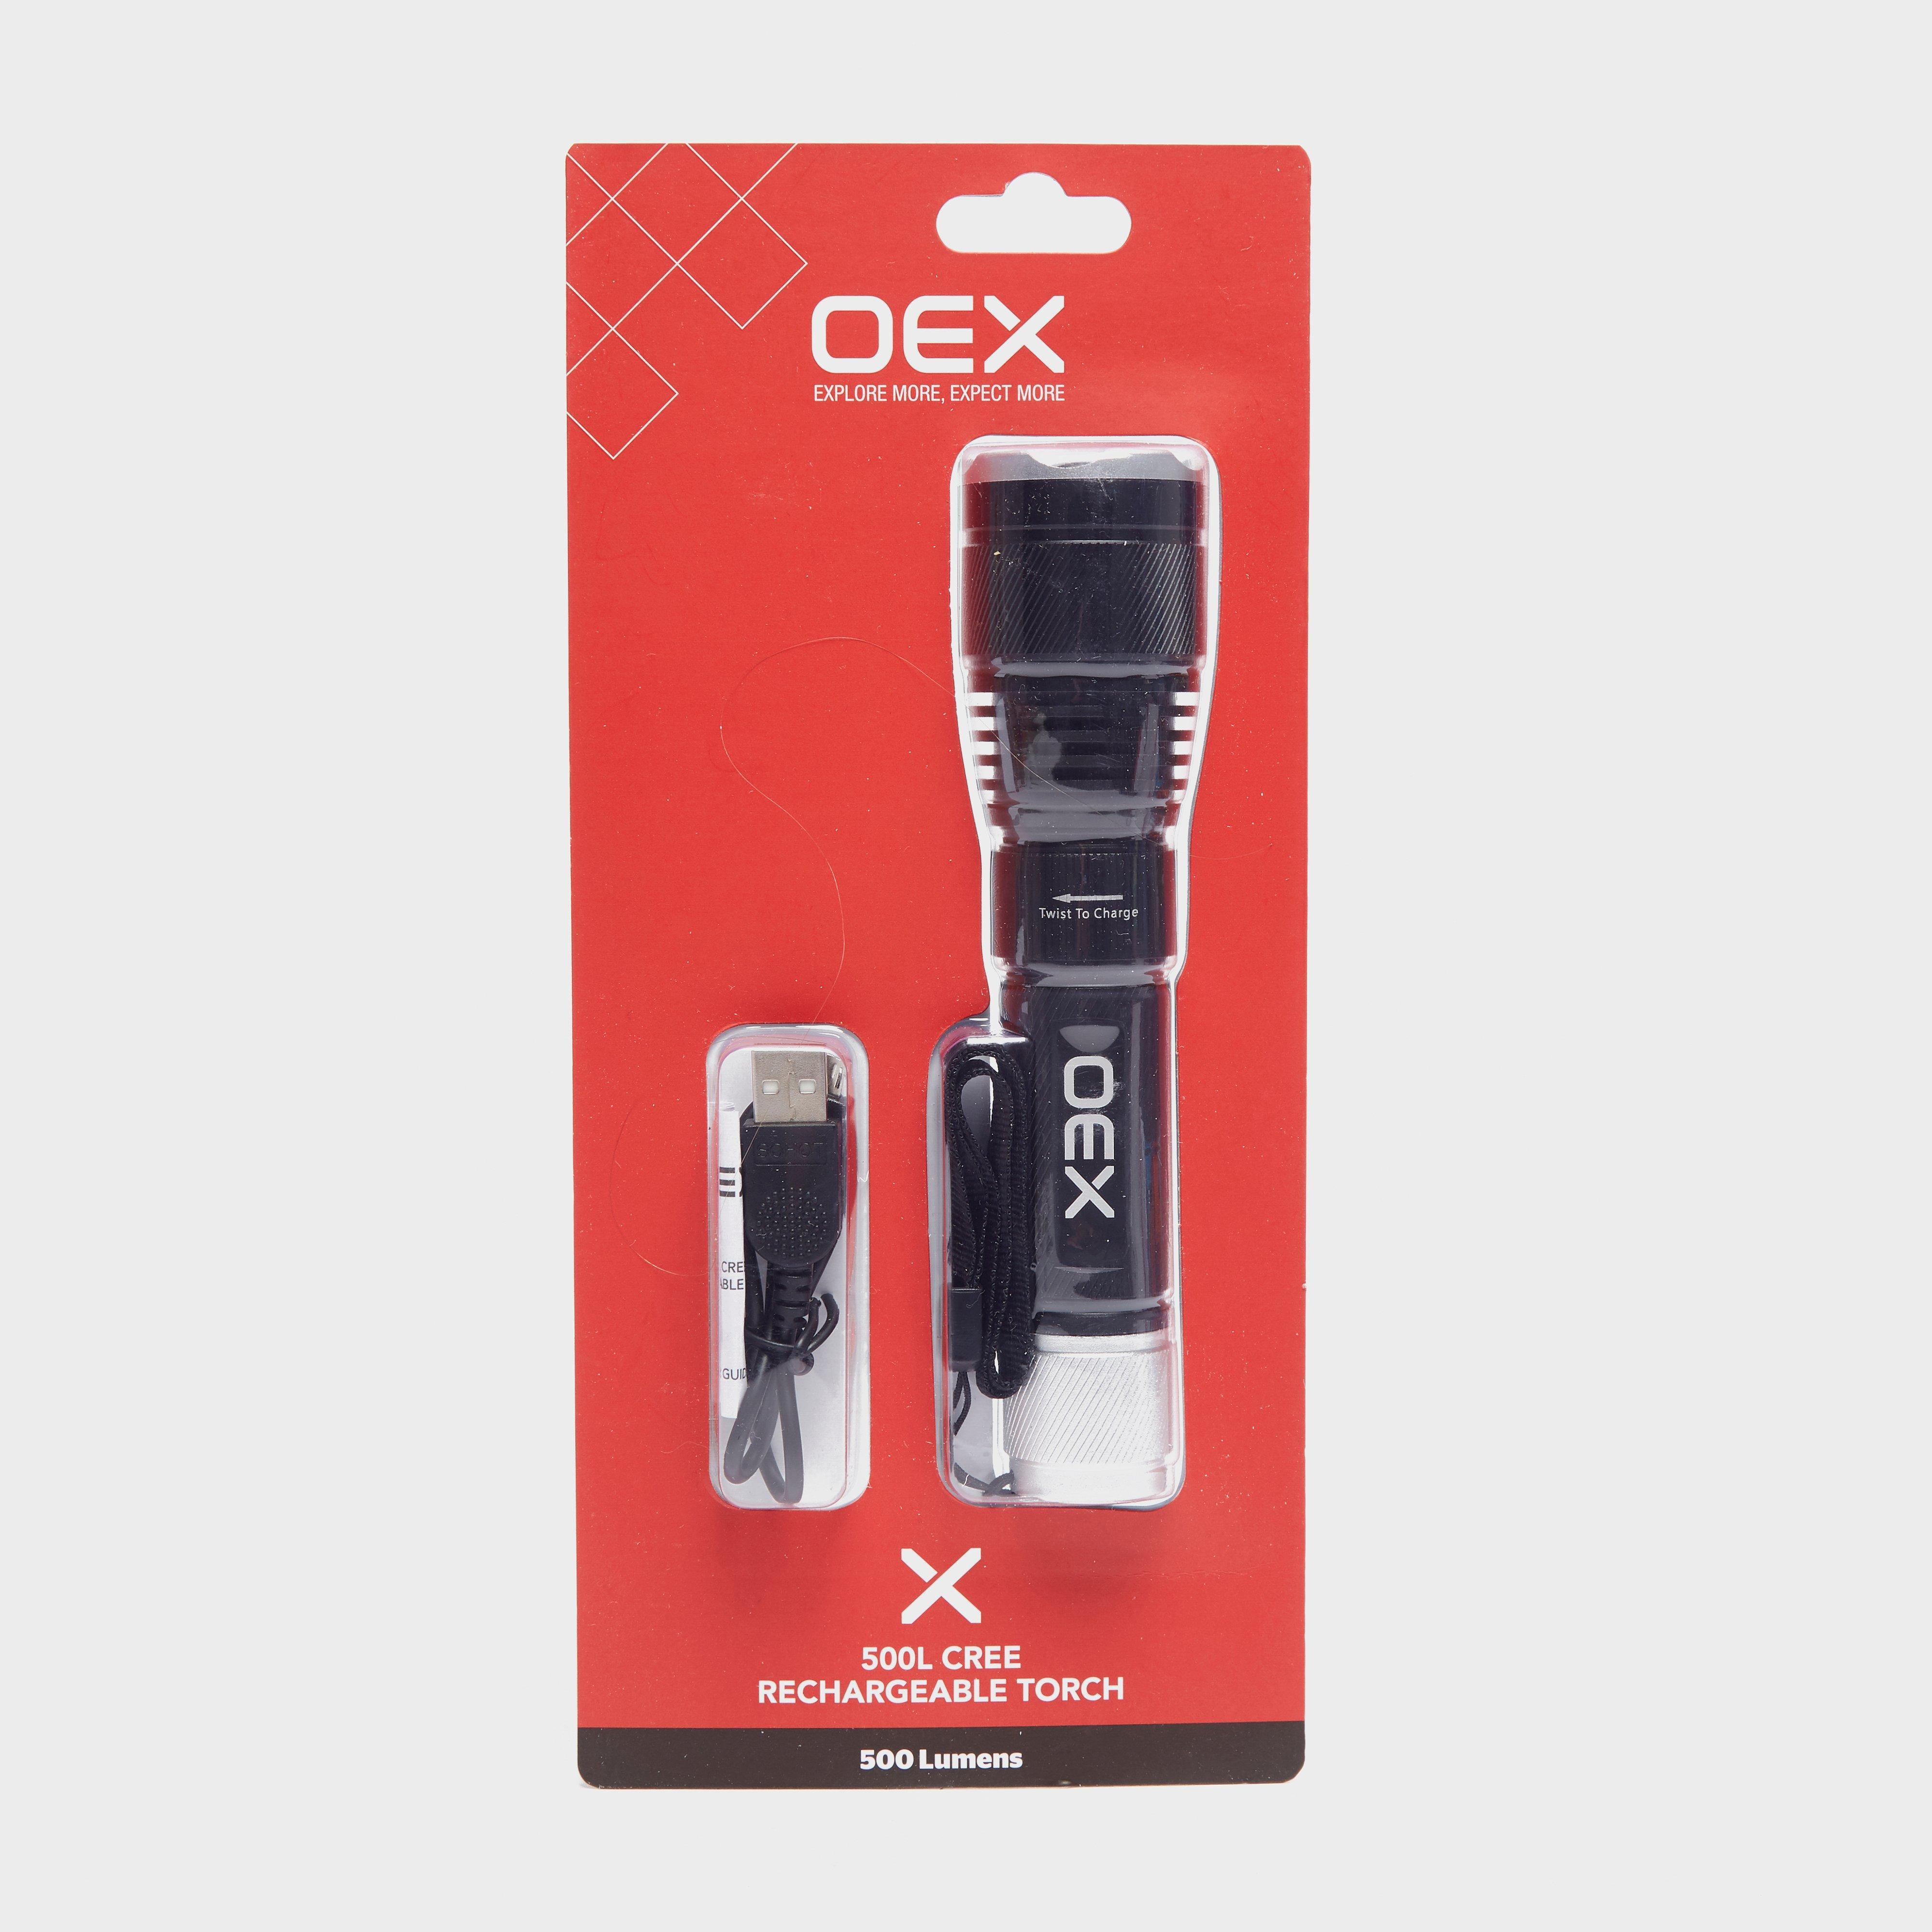 Oex Rechargeable Cree Torch - Blk/blk  Blk/blk